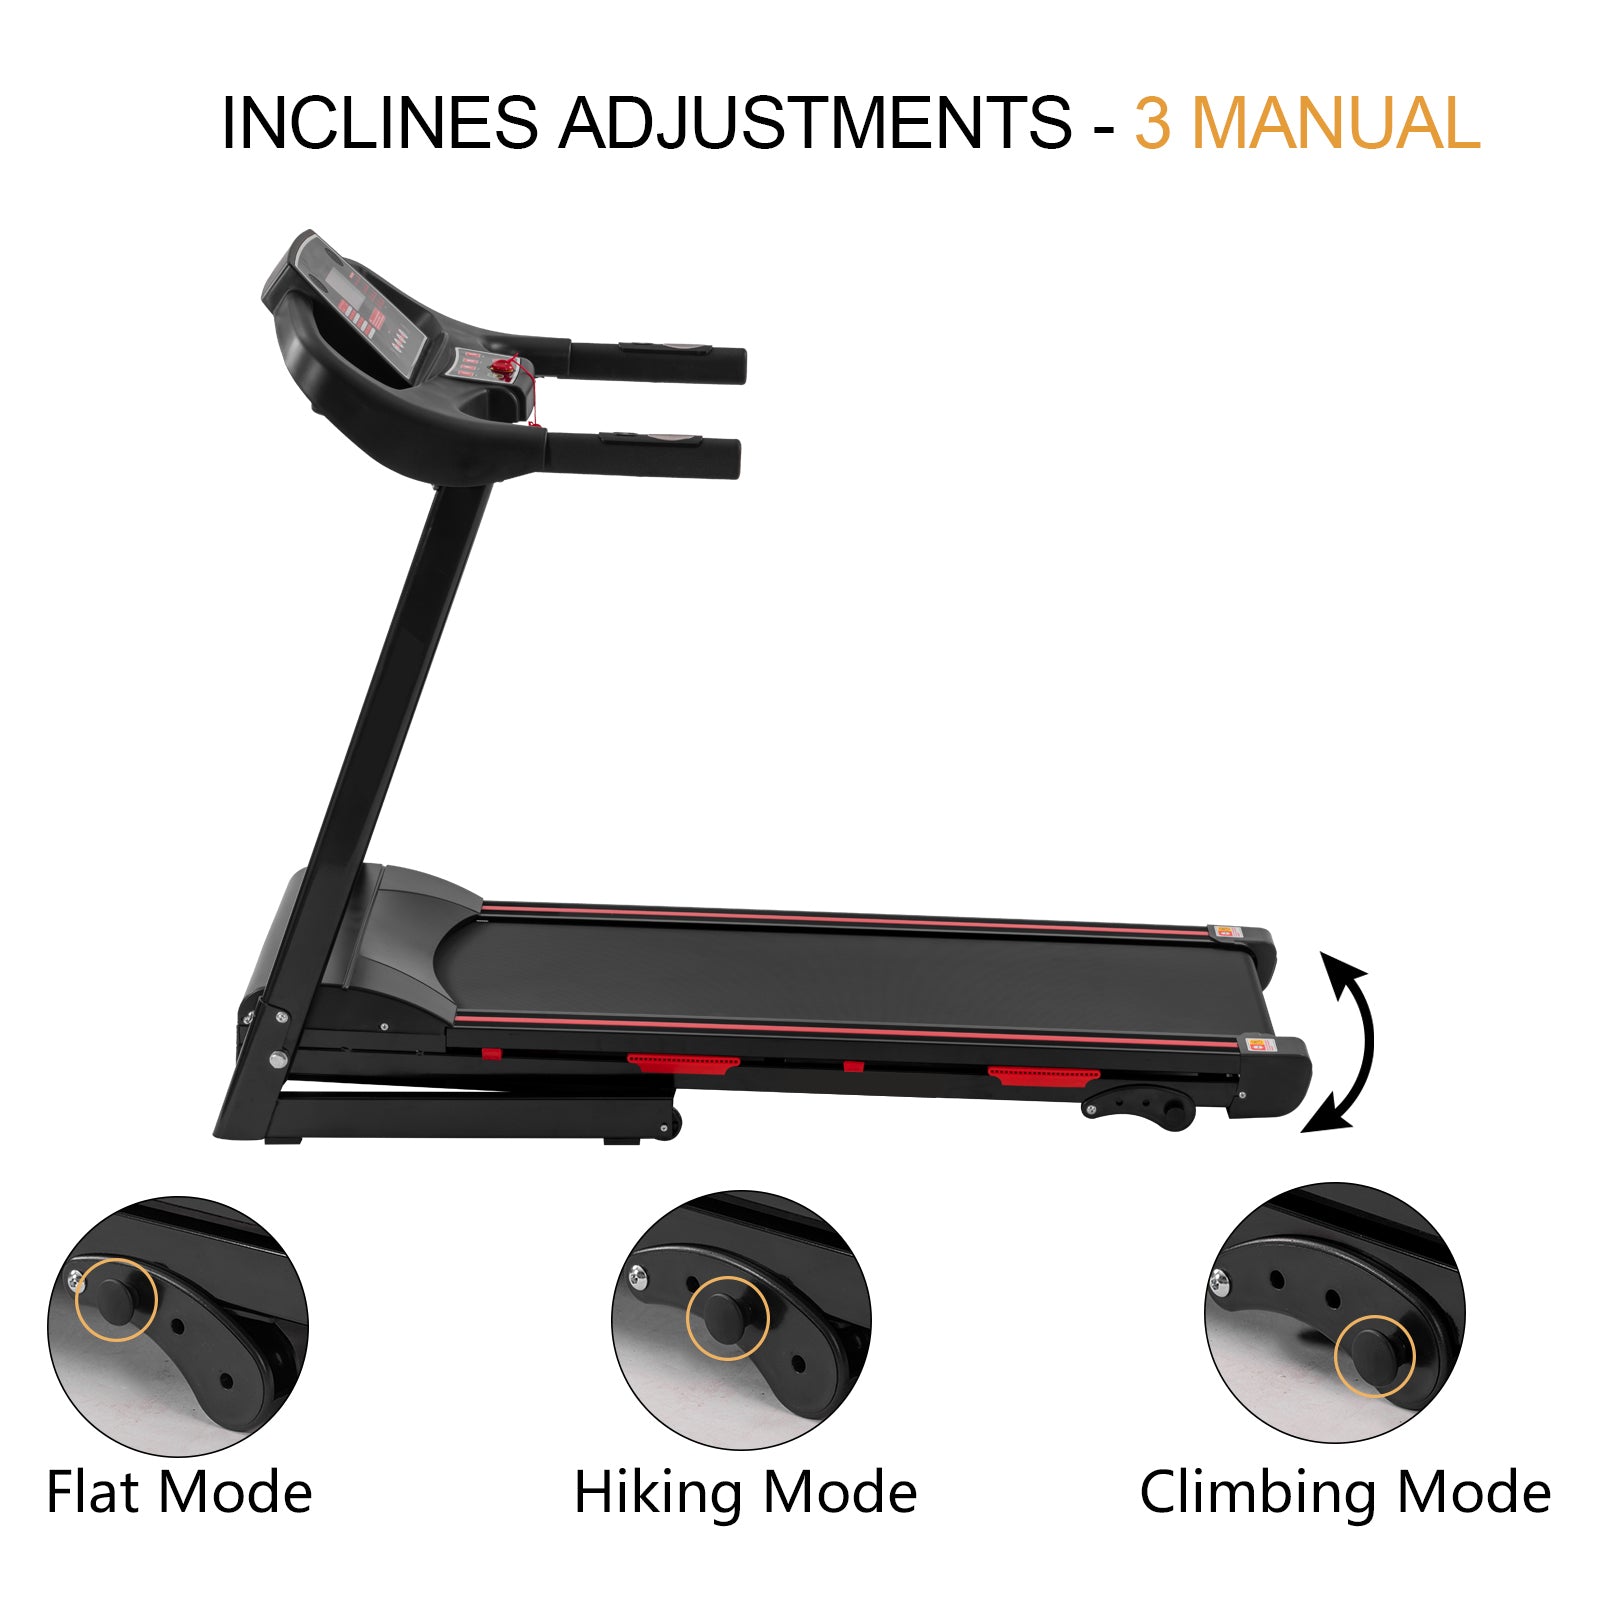 Fyc Folding Treadmill for Home 330 Lbs Weight